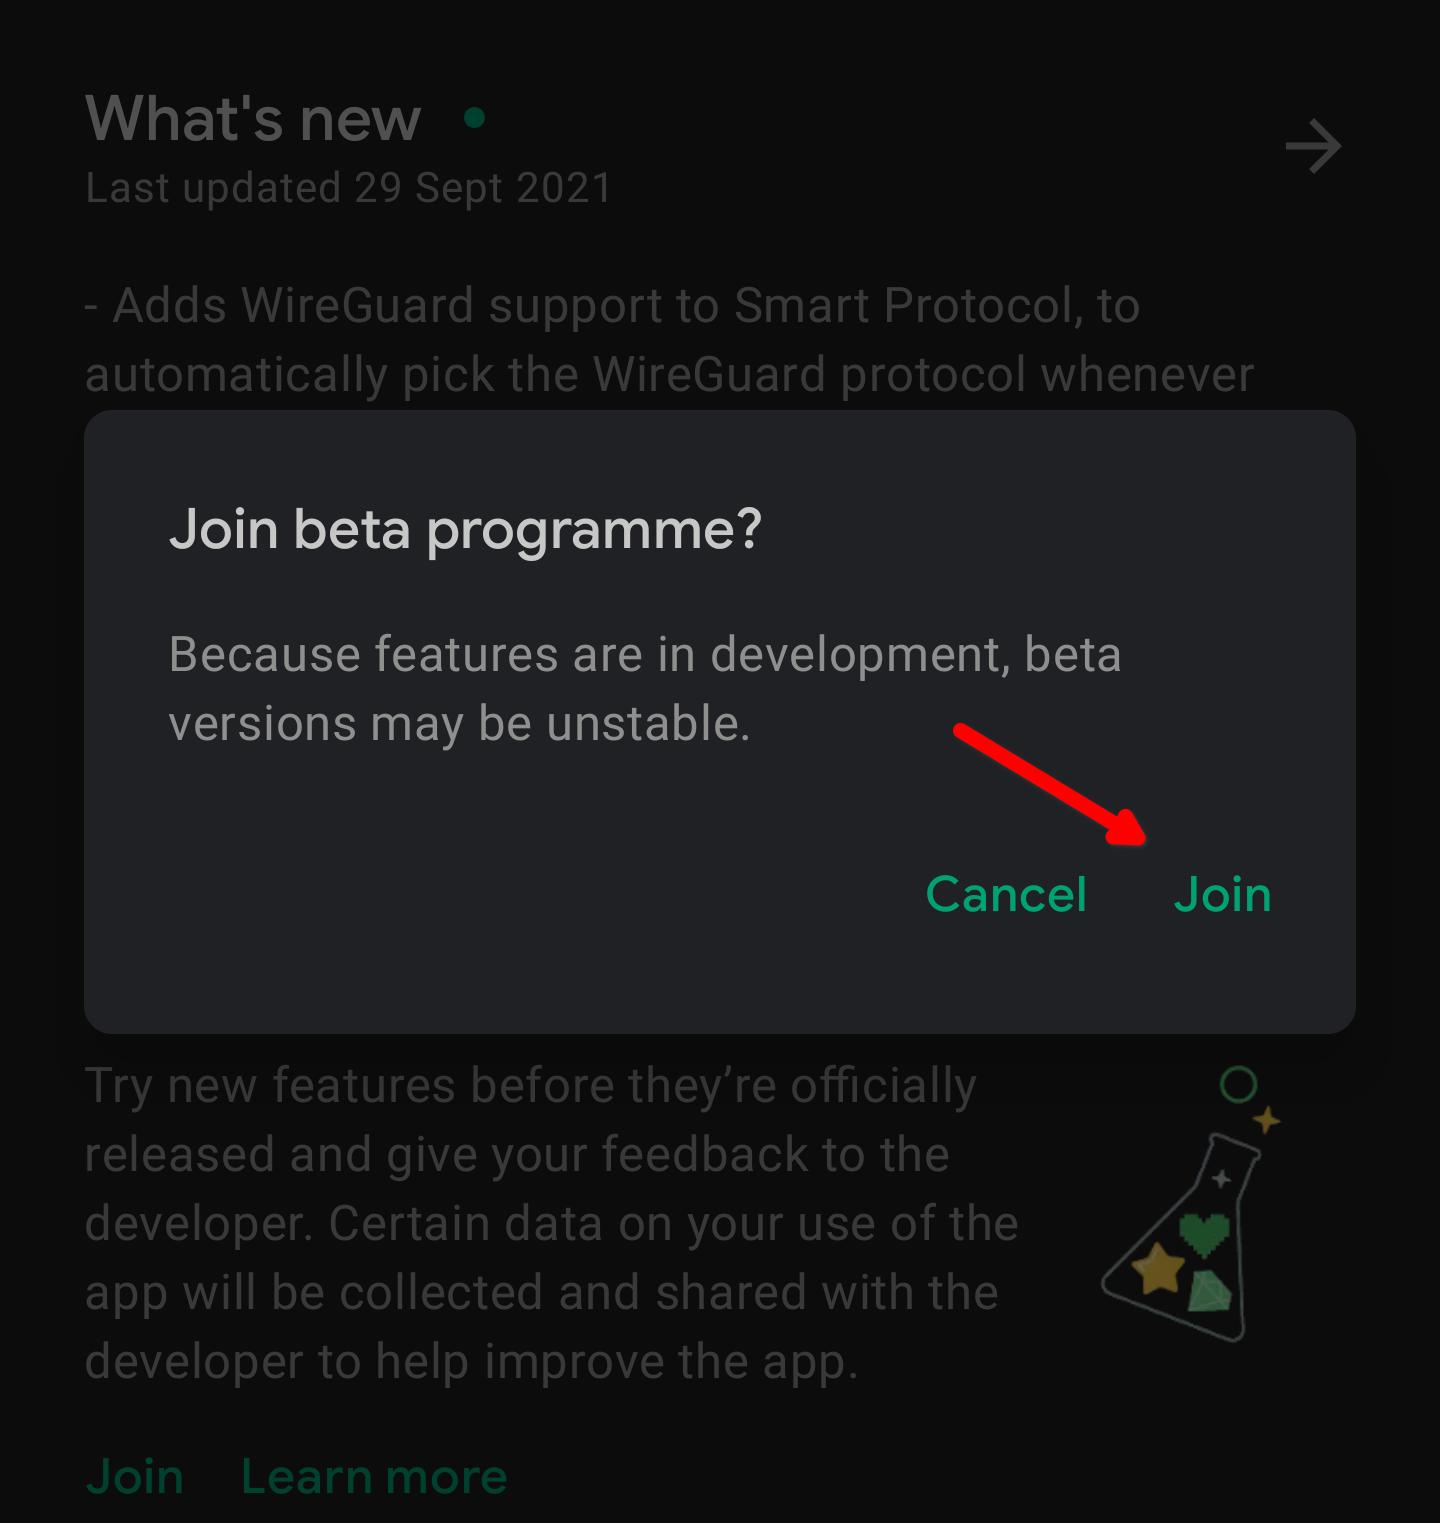 Confirm that you want to join the beta program